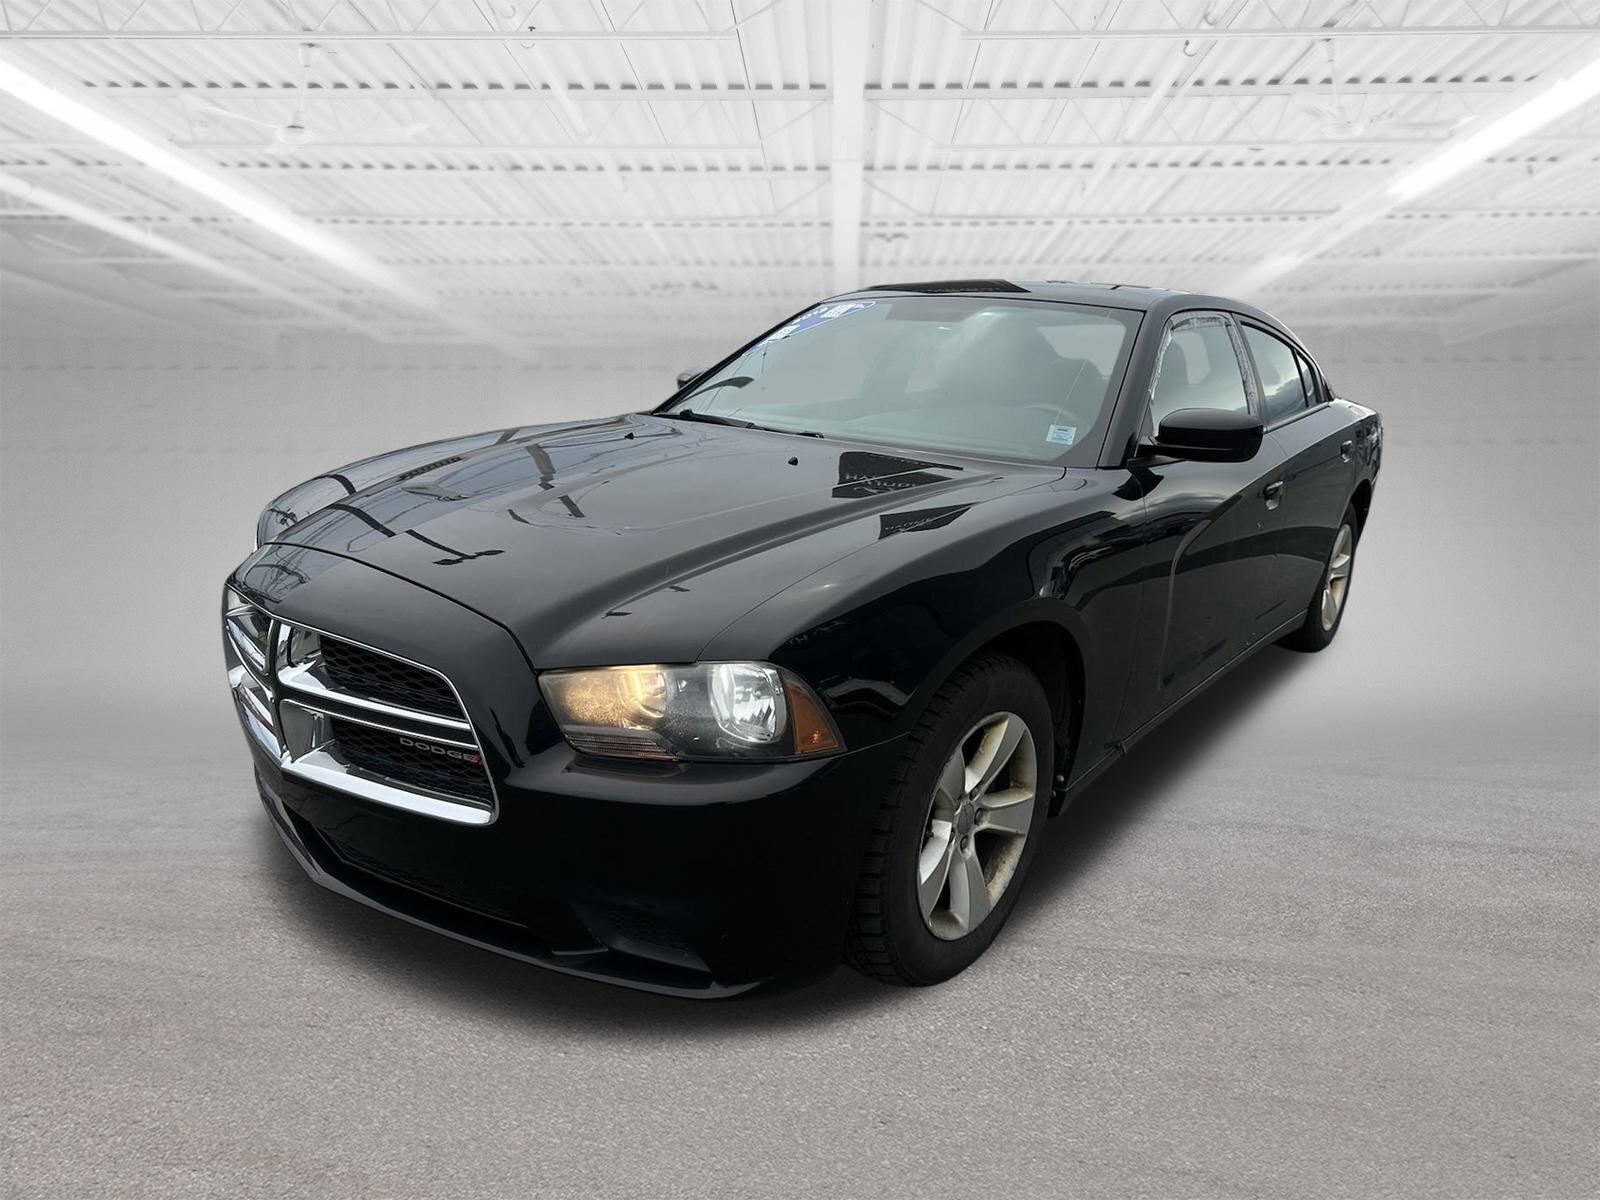 2013 Dodge Charger 